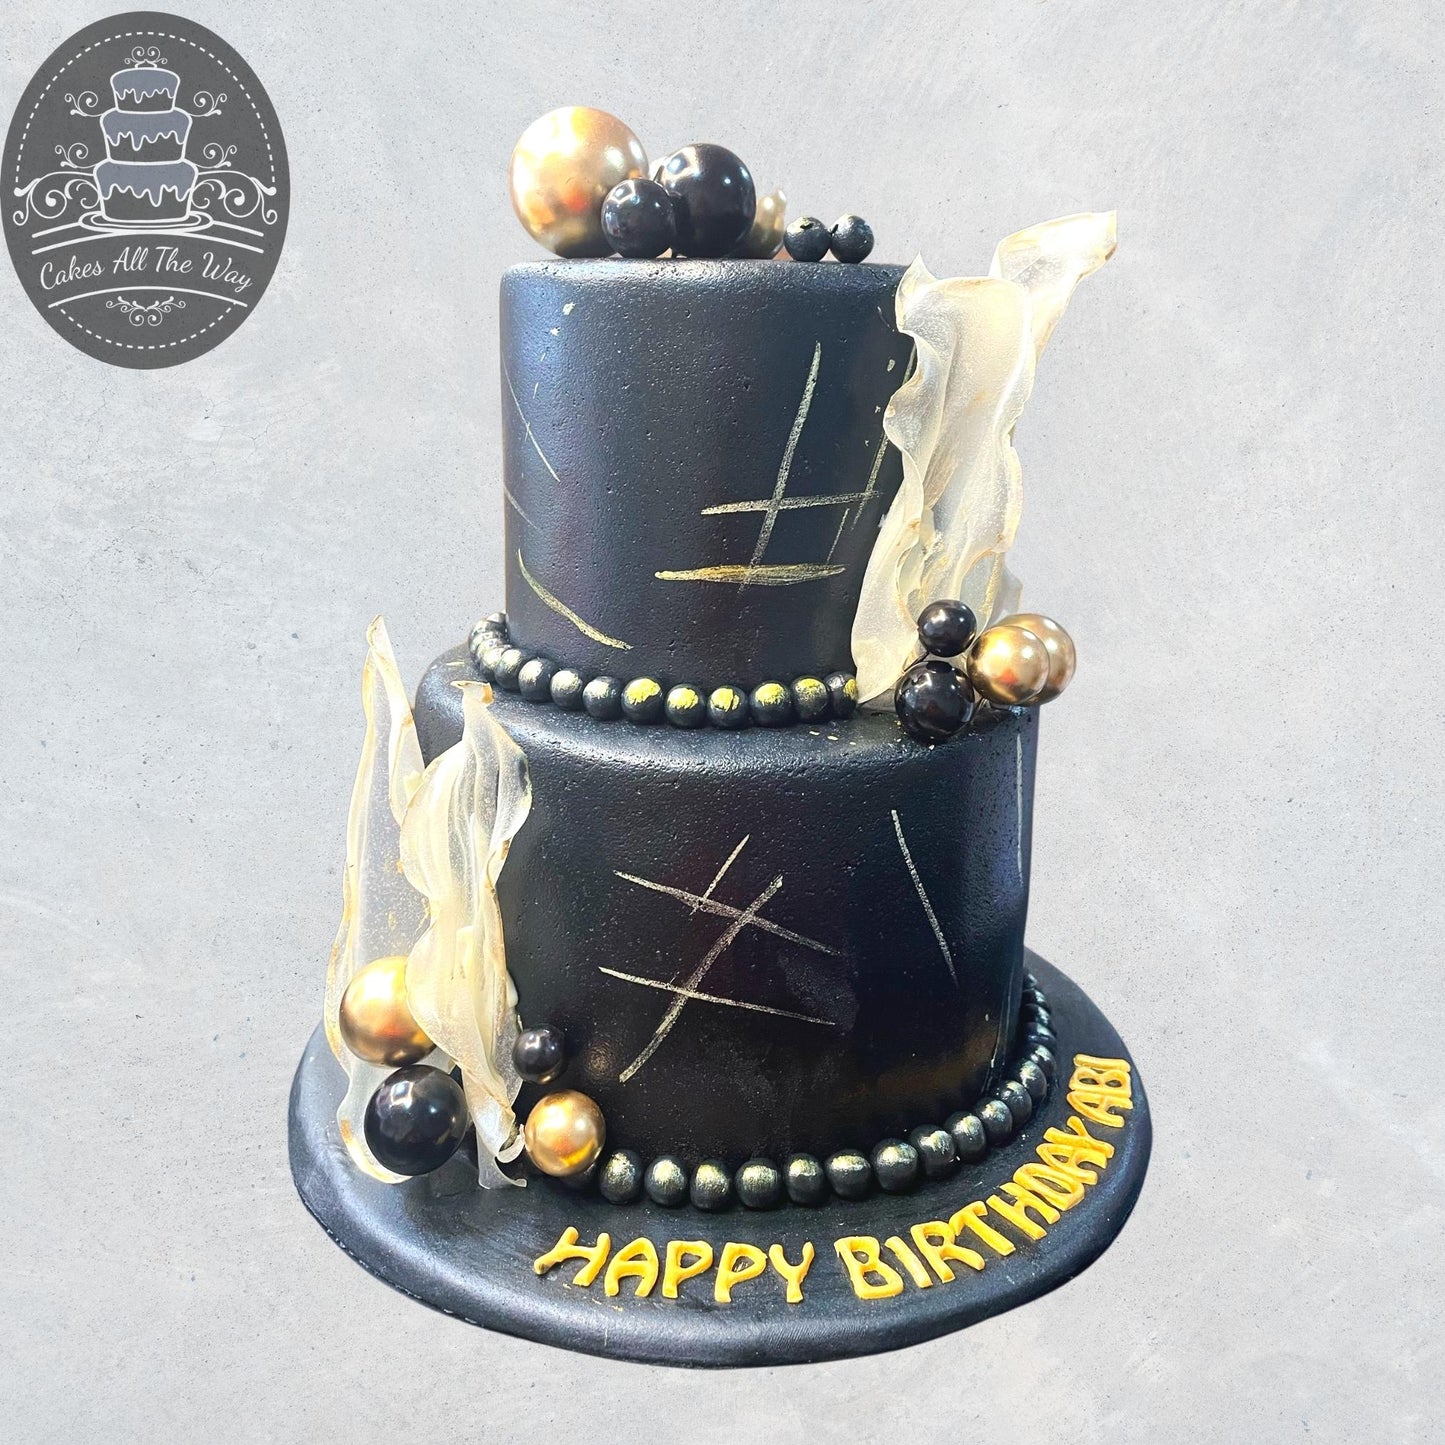 2-Tier Black and Gold Theme Cake